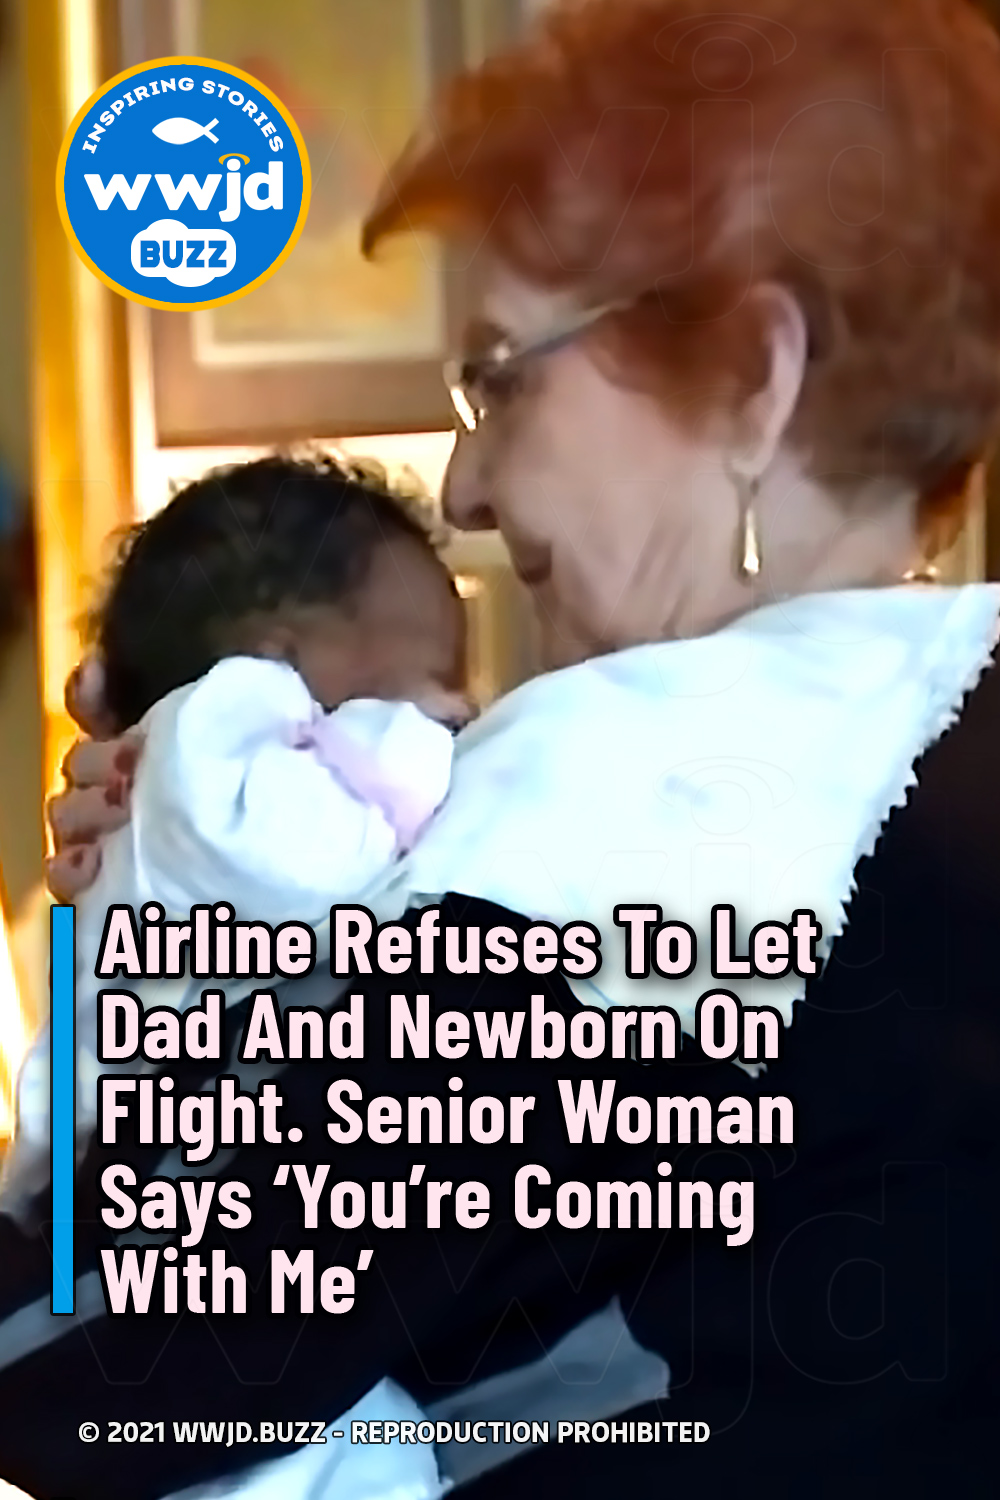 Airline Refuses To Let Dad And Newborn On Flight. Senior Woman Says ‘You’re Coming With Me’